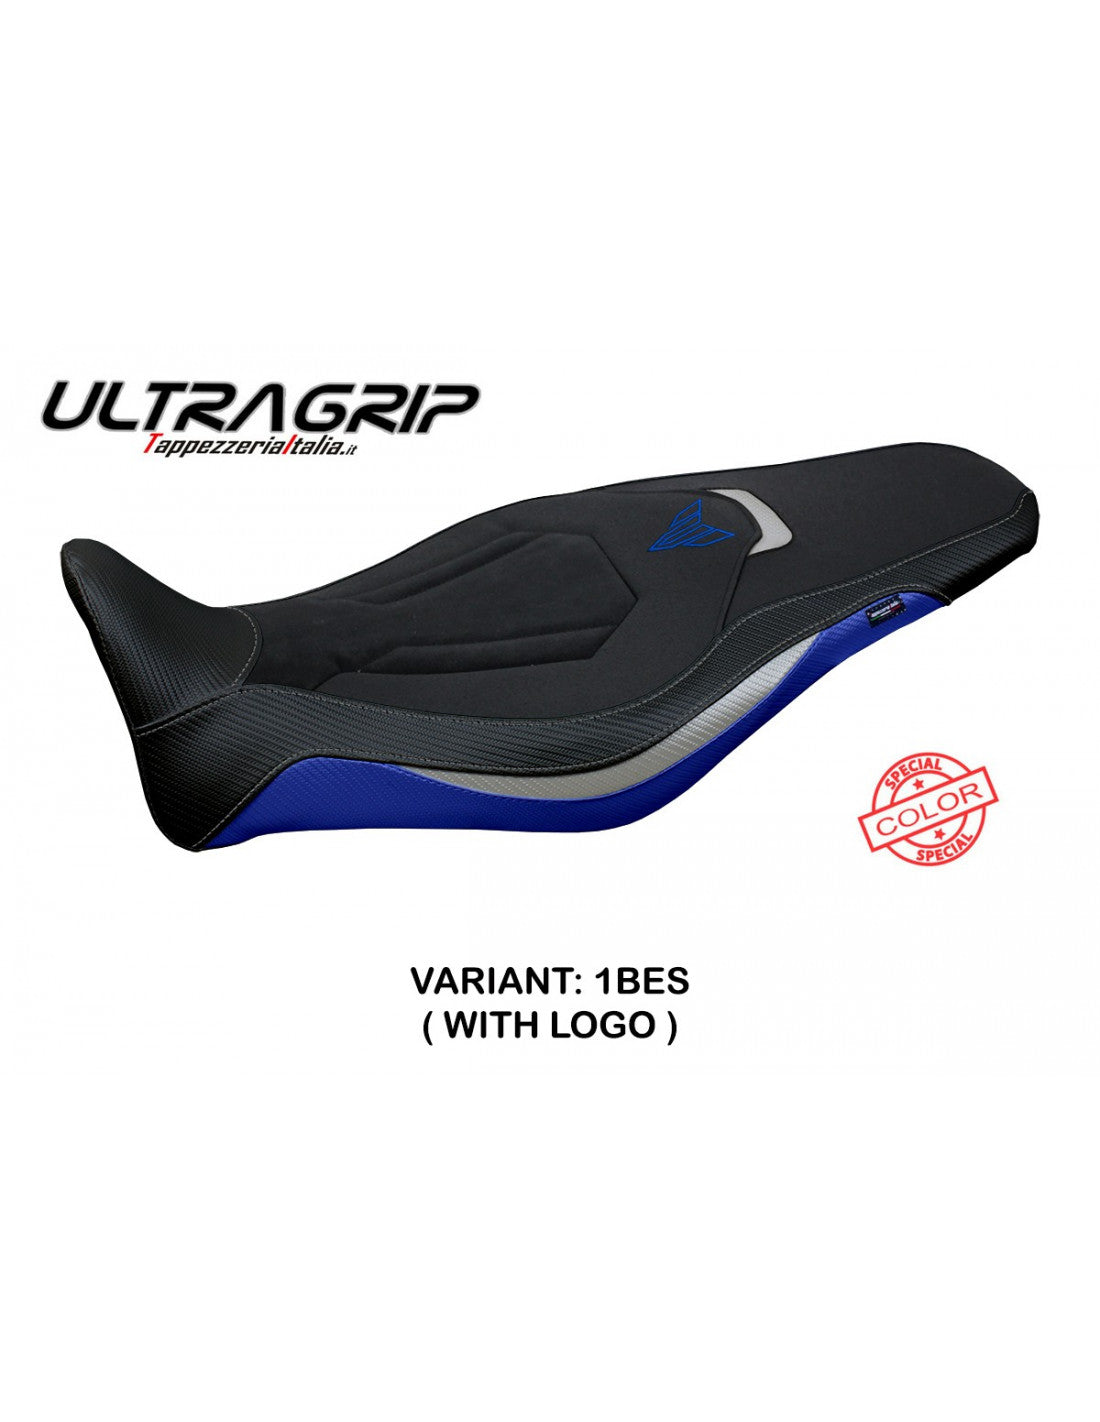 Tappezzeria Atos Special Color Ultragrip Seat Cover for Yamaha MT-09